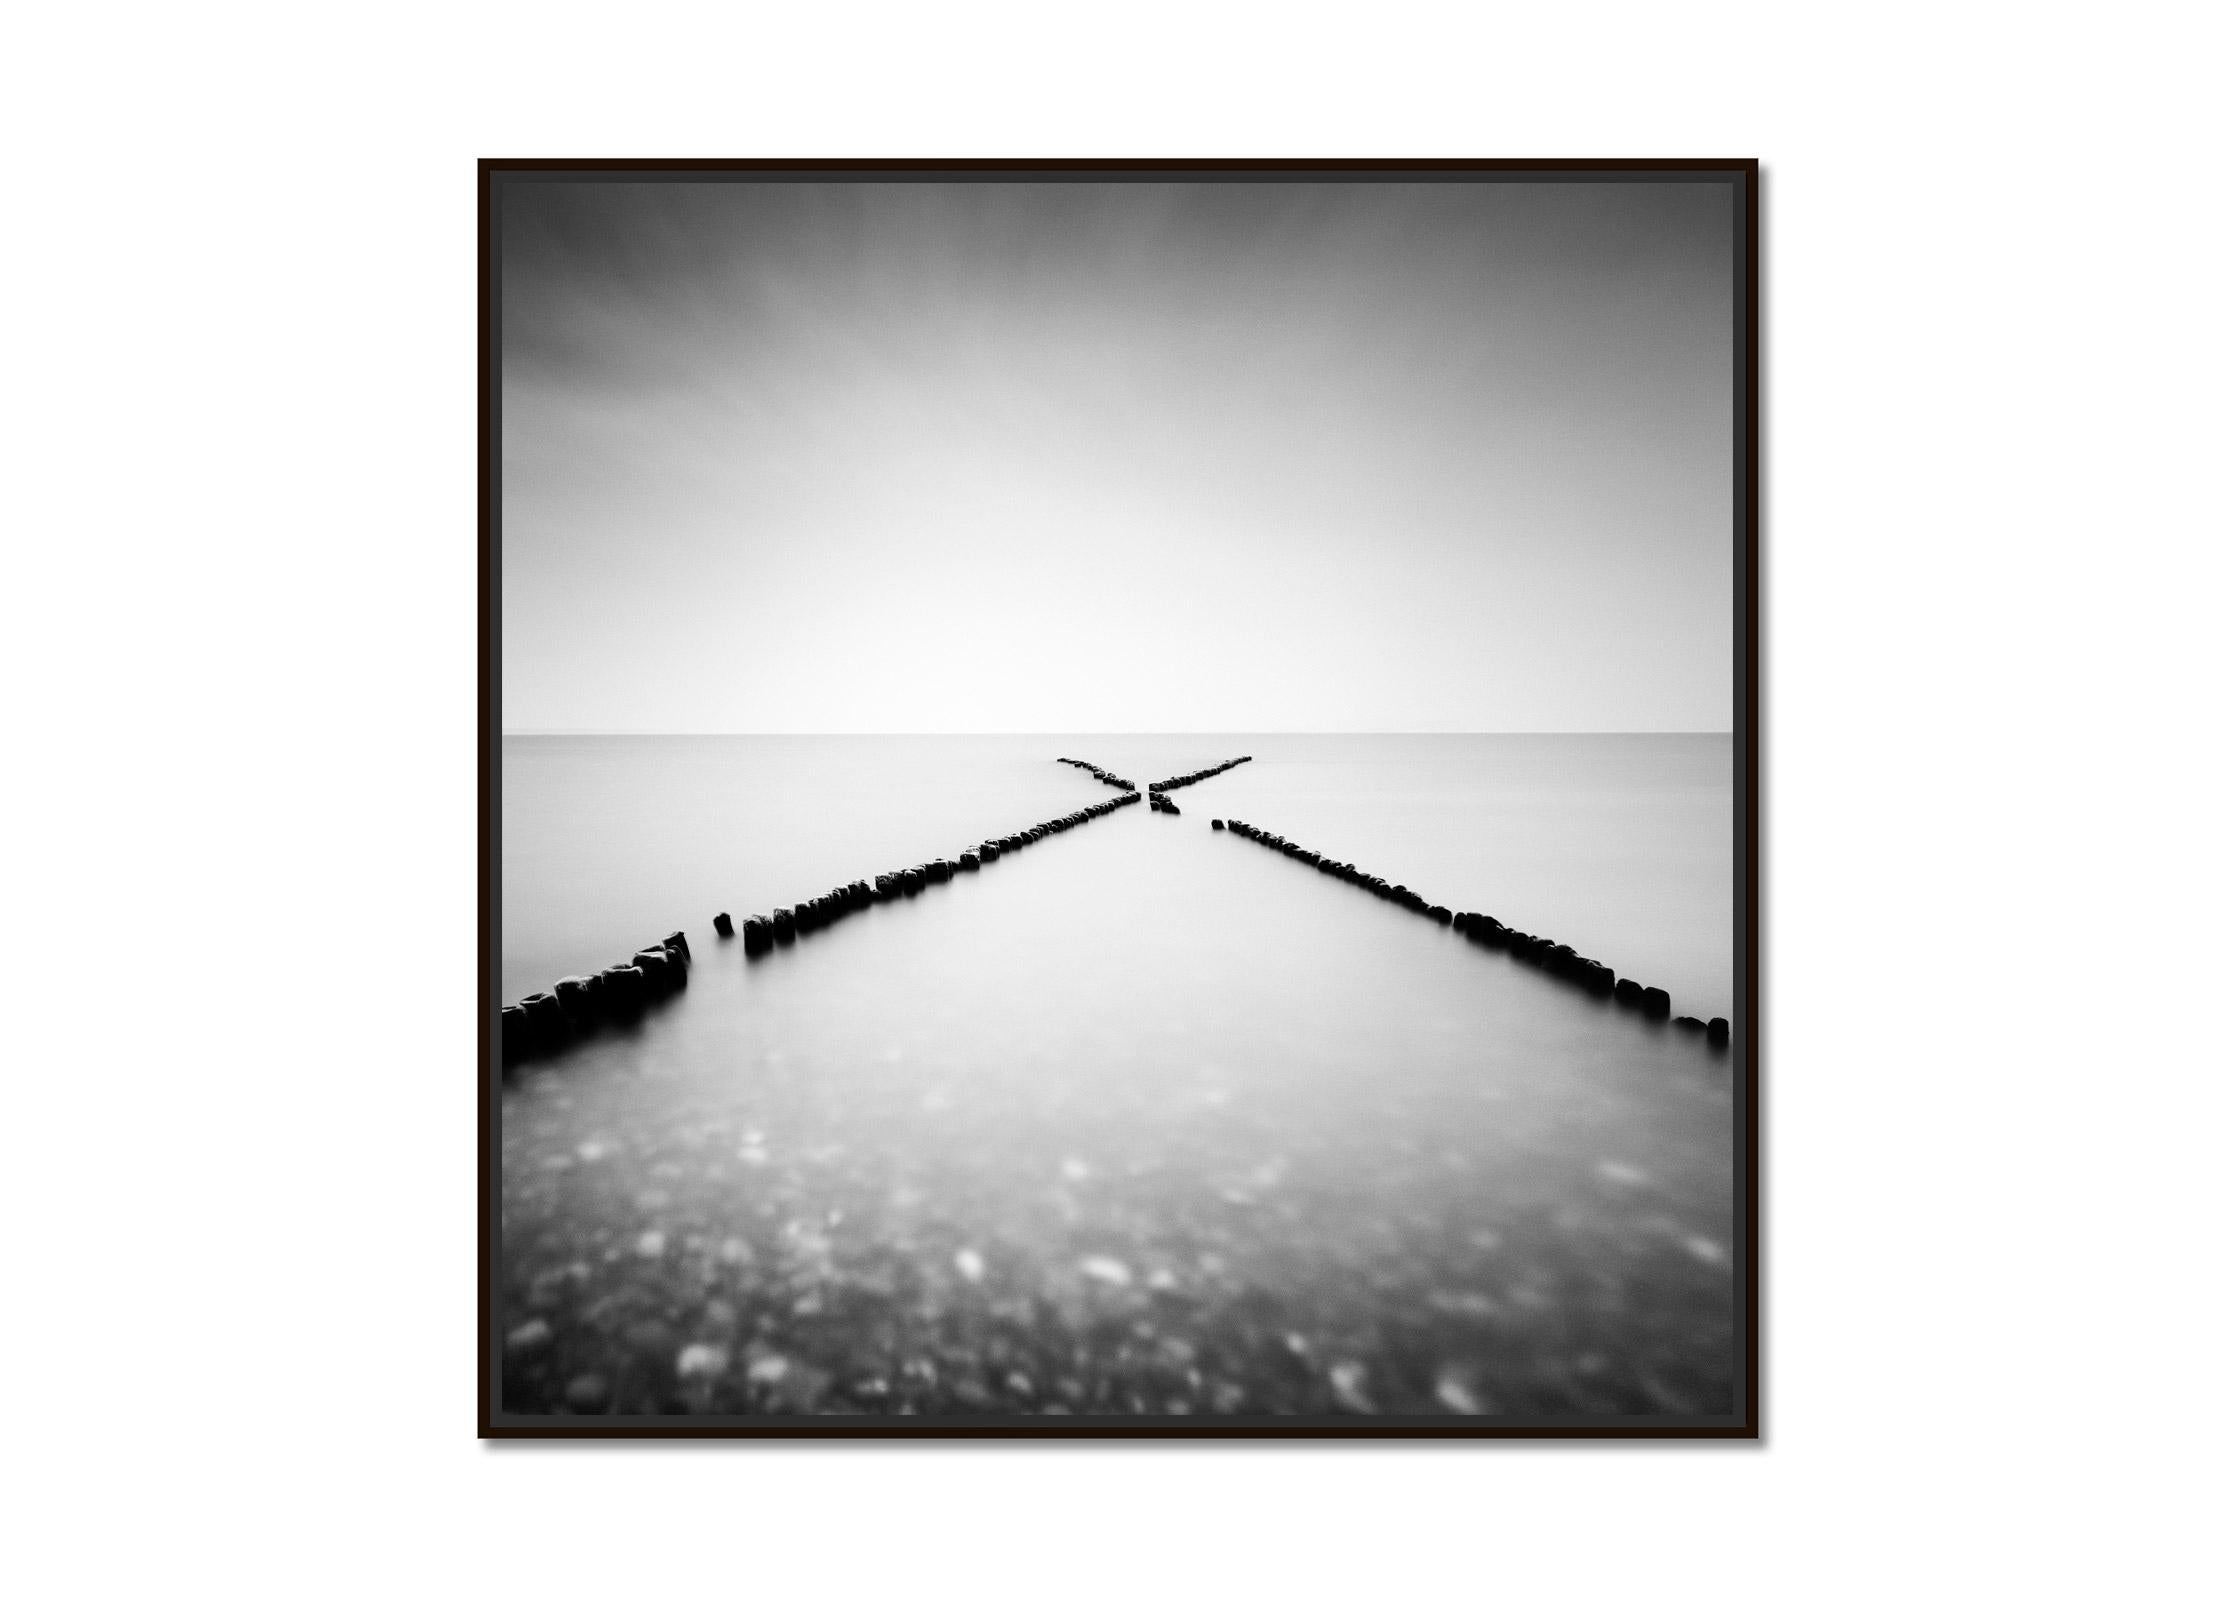 X - Factor, Sylt, Germany, long exposure, black and white waterscape photography - Photograph by Gerald Berghammer